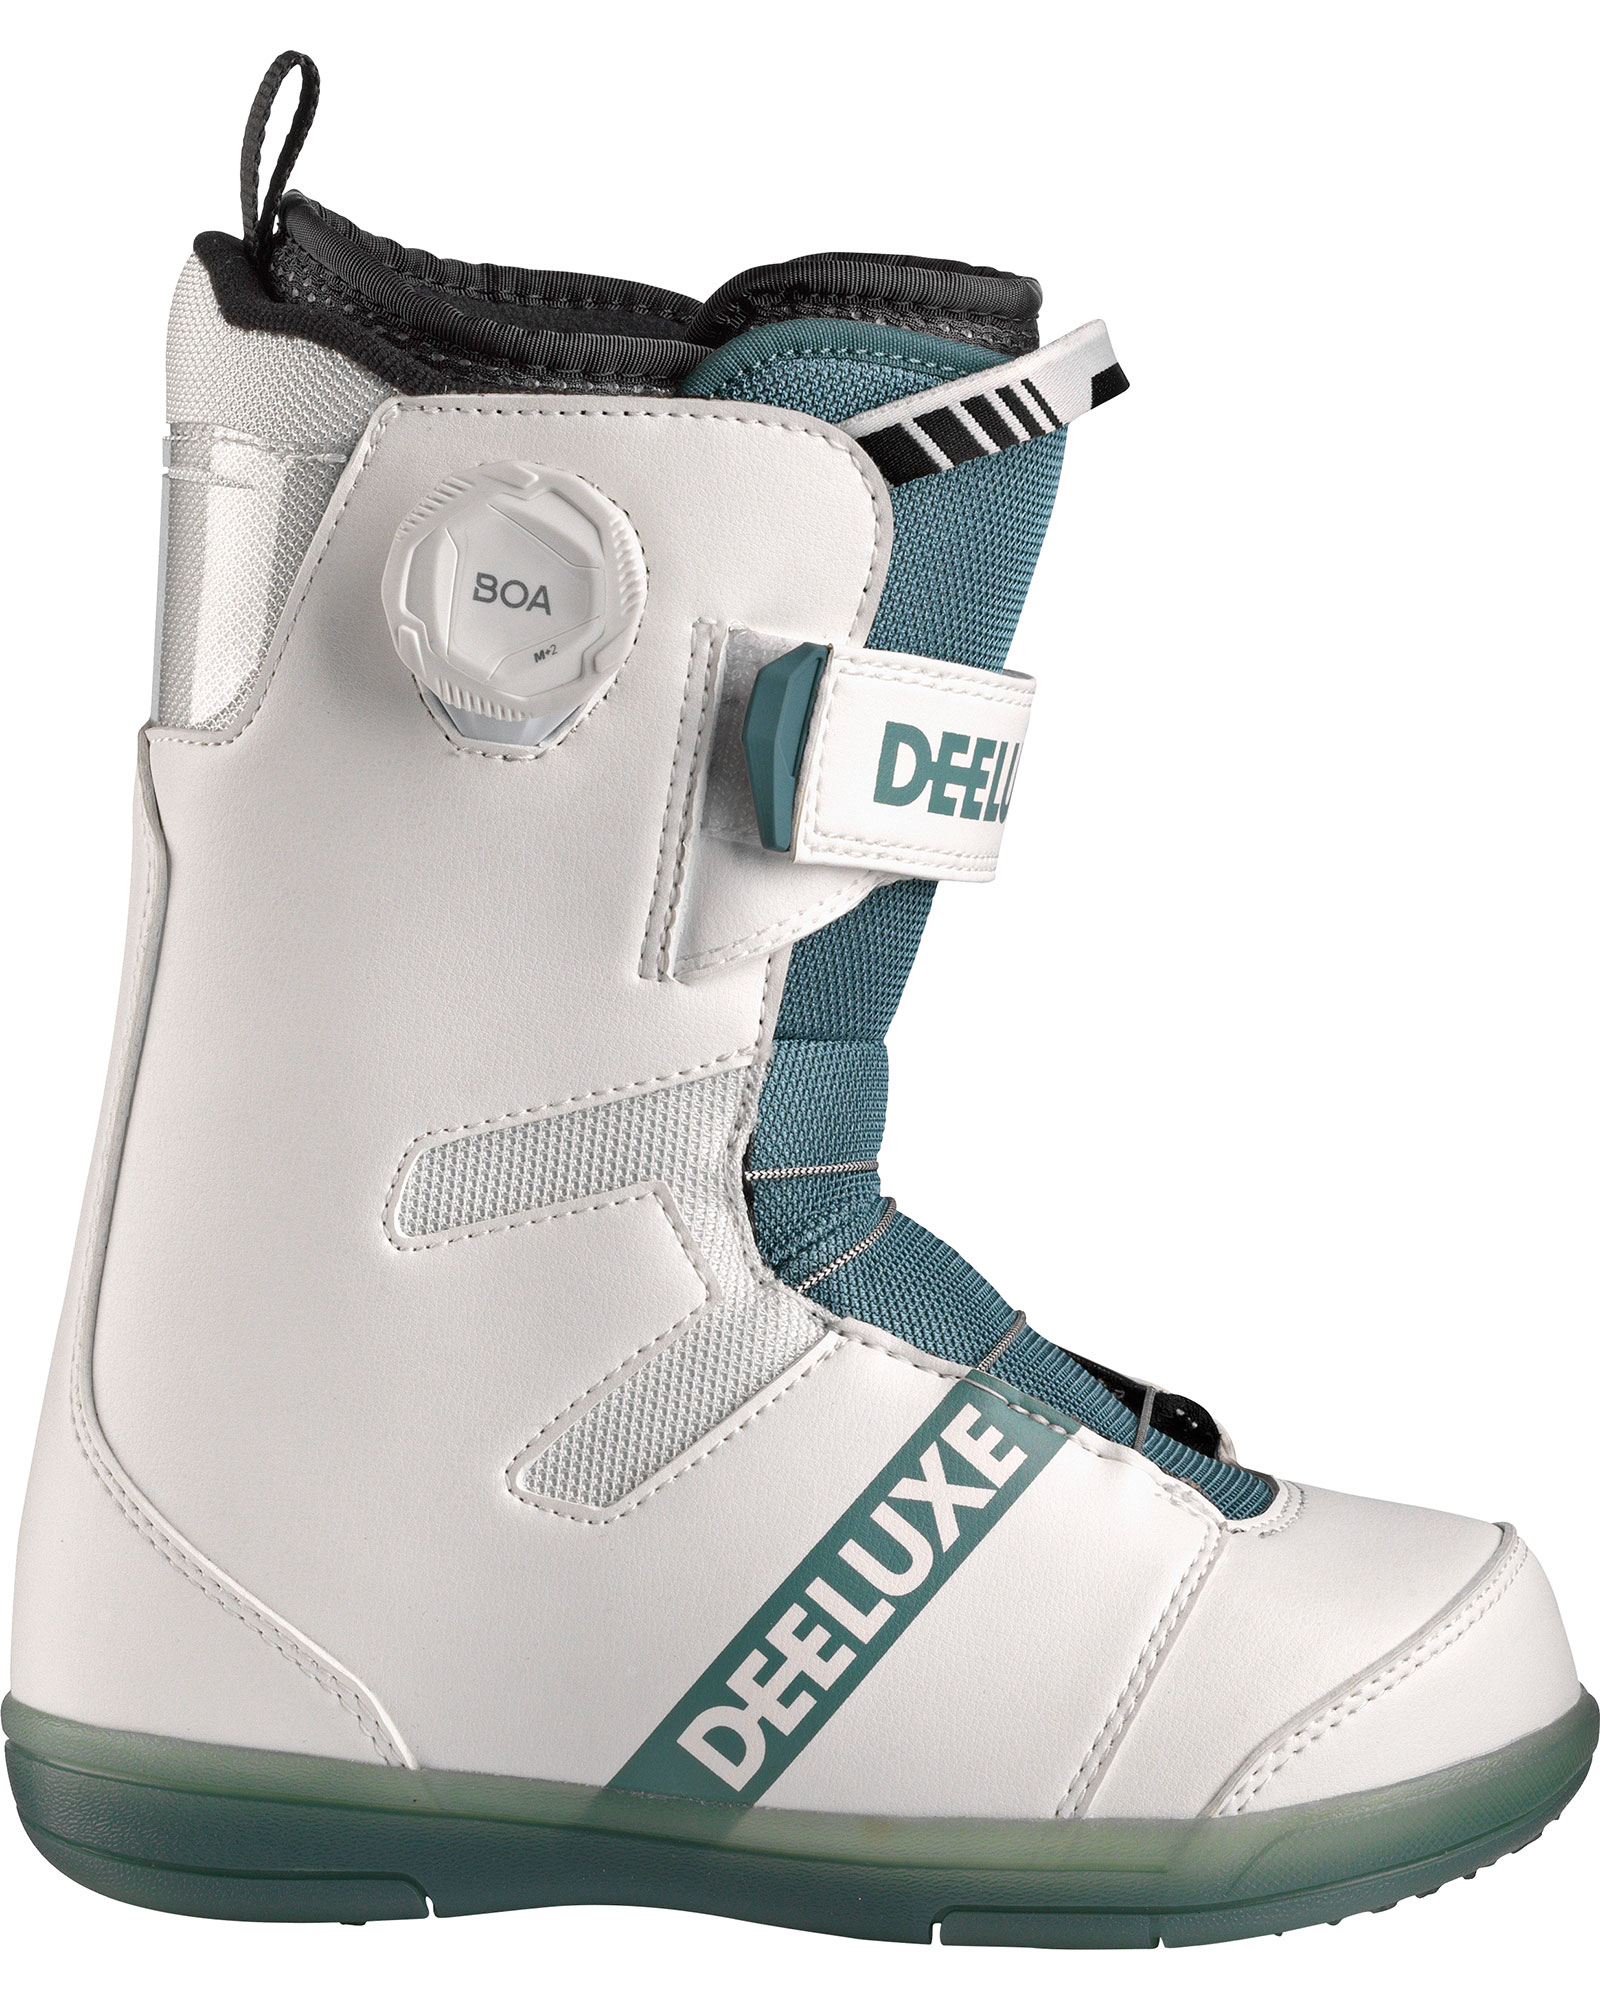 Deeluxe Youth Rough Diamond Snowboard Boots